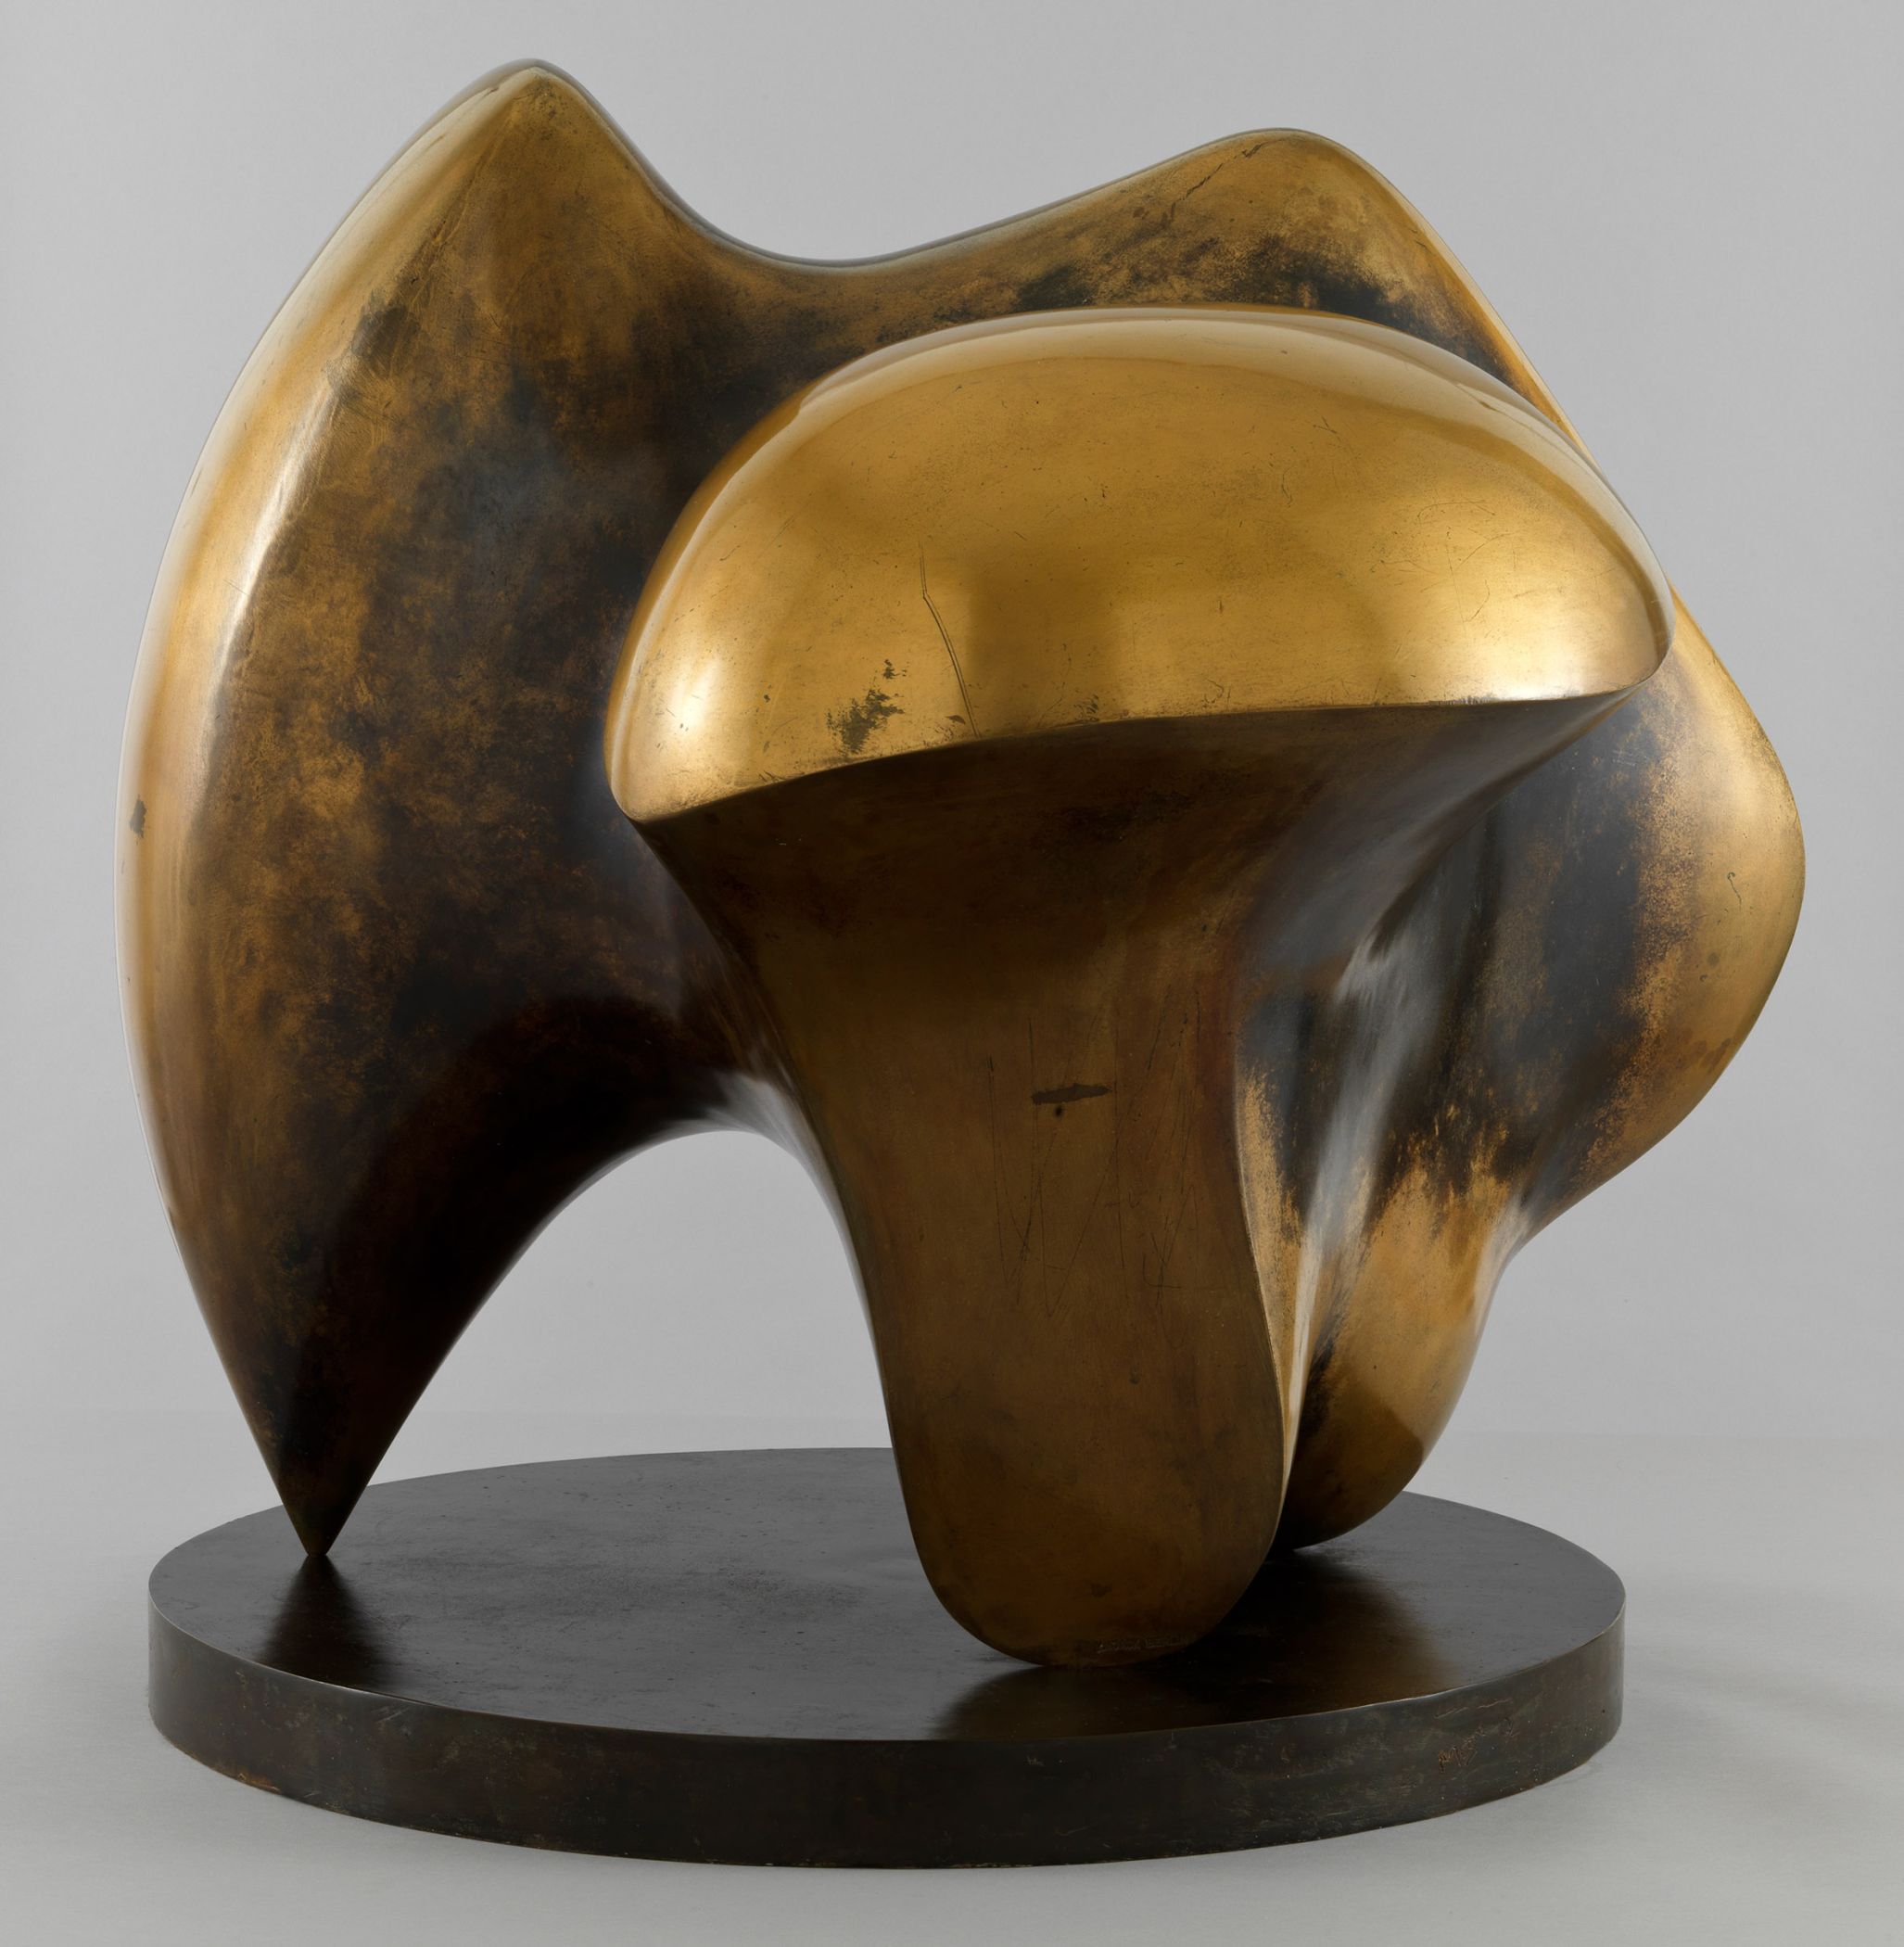 Henry Moore, Working Model for Three Way Piece No. 1: Points, 1964. Tate: Presented by the artist 1978 © Reproduced by permission of The Henry Moore Foundation. Foto: © Tate, London 2016